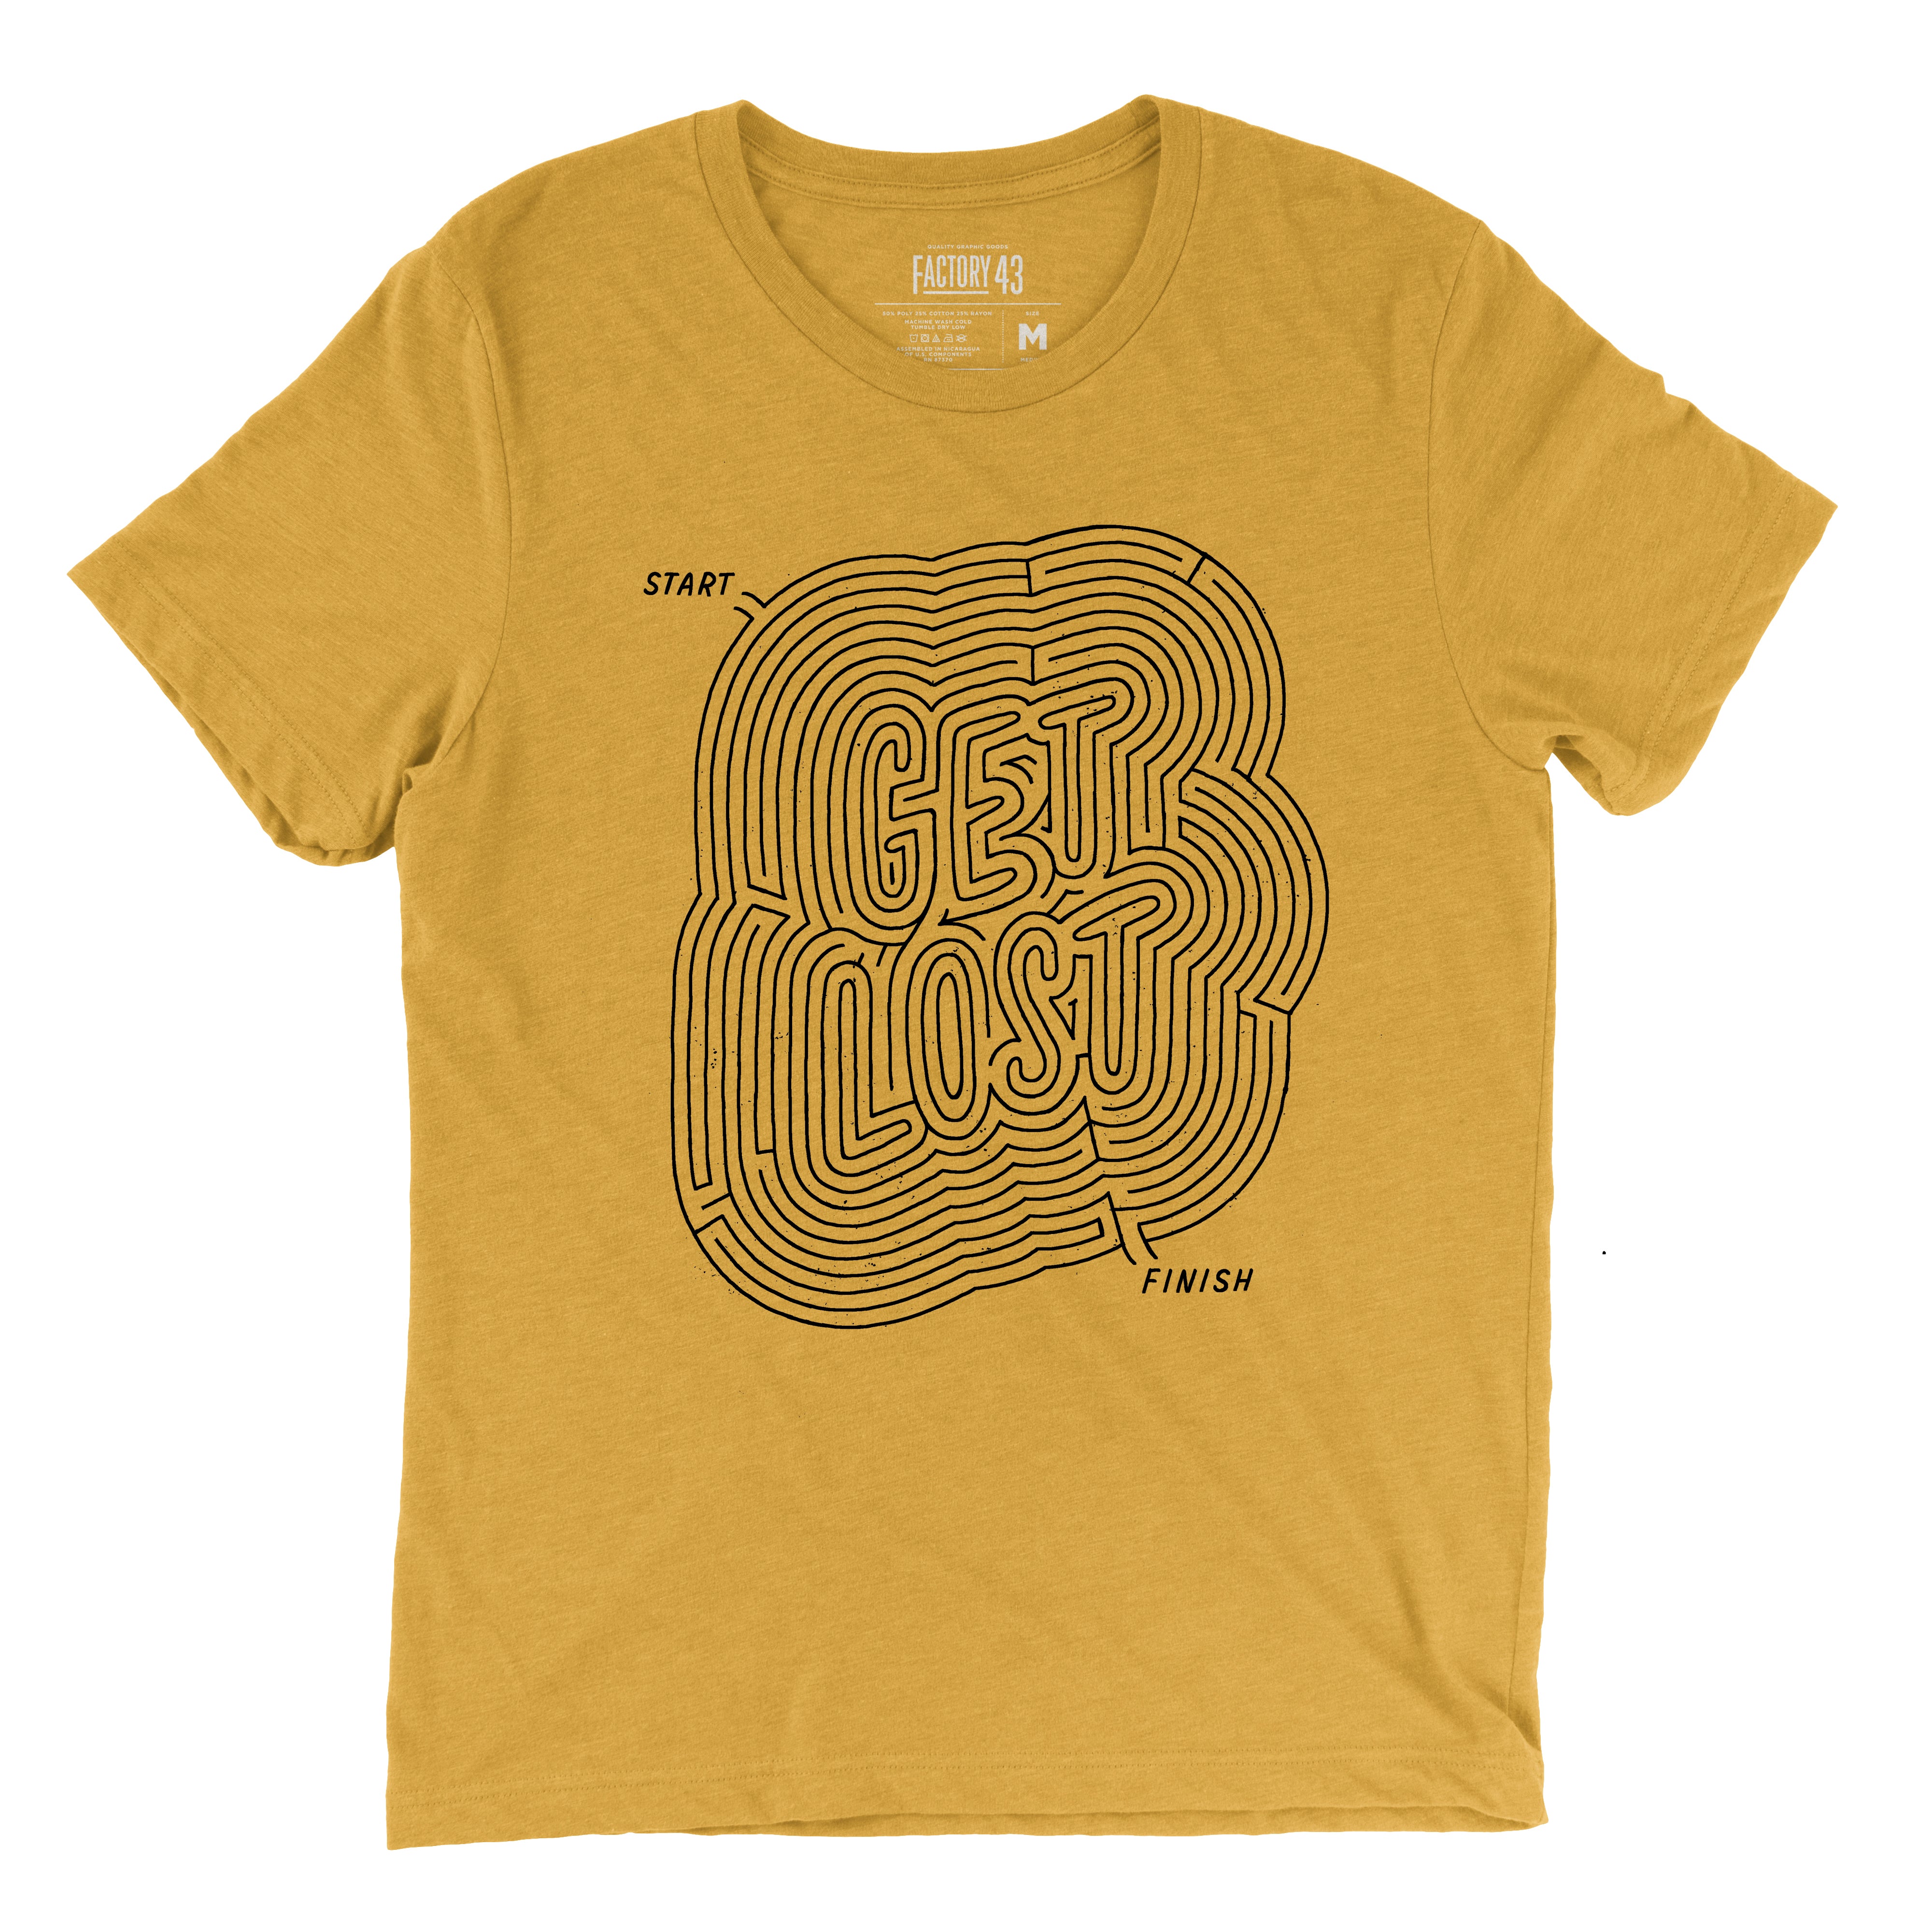 Super soft graphic mustard yellow mens/womens tshirt of the words Get Lost made up of a maze with a start and finish part of the maze. Factory 43 is a design studio that makes art with a PNW vibe that reflects their Midwest/Southern roots. This cotton/polyester tee was printed in Seattle, Washington.